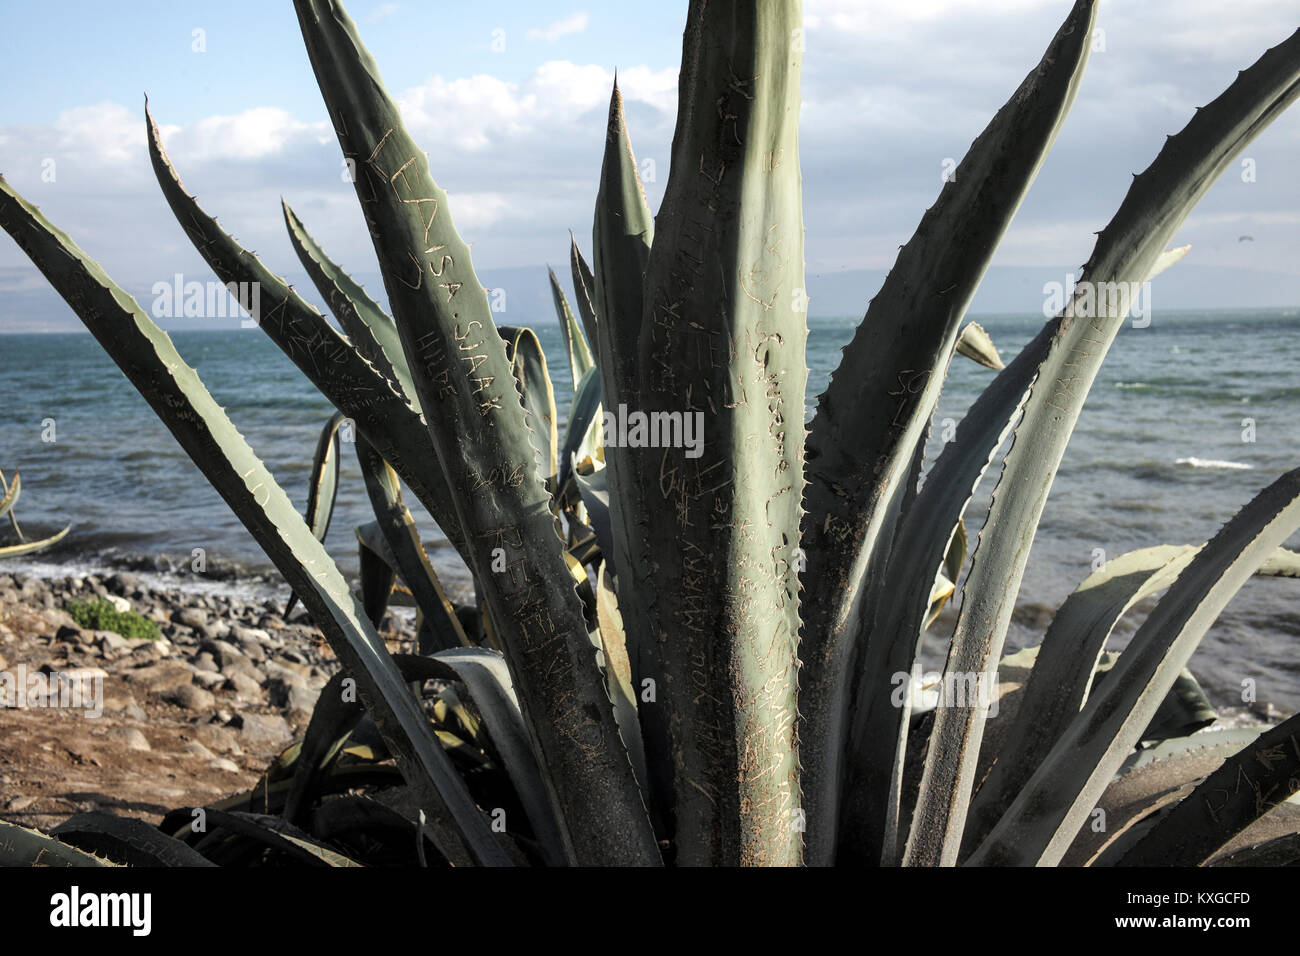 Israel. 2nd Jan, 2018. Inscriptions on the agave growing on the shore of the Sea of Galilee in Capernaum, Israel on 29.12.2017 by Wiktor Dabkowski Credit: Wiktor Dabkowski/ZUMA Wire/Alamy Live News Stock Photo